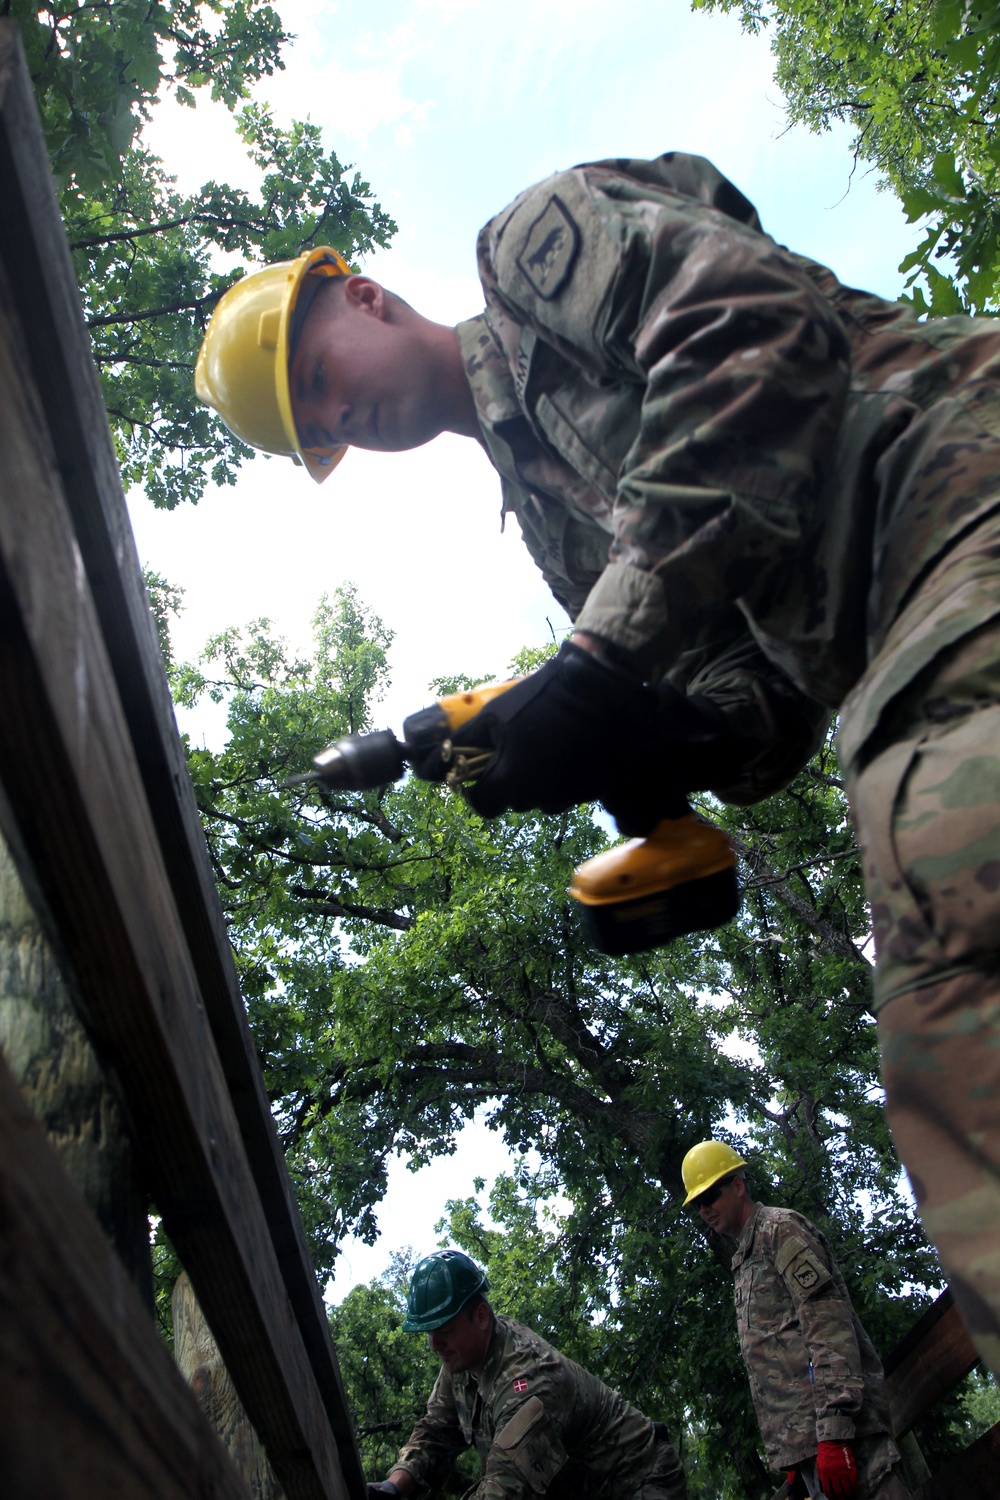 National Guard, allied nation partnership benefits local communities